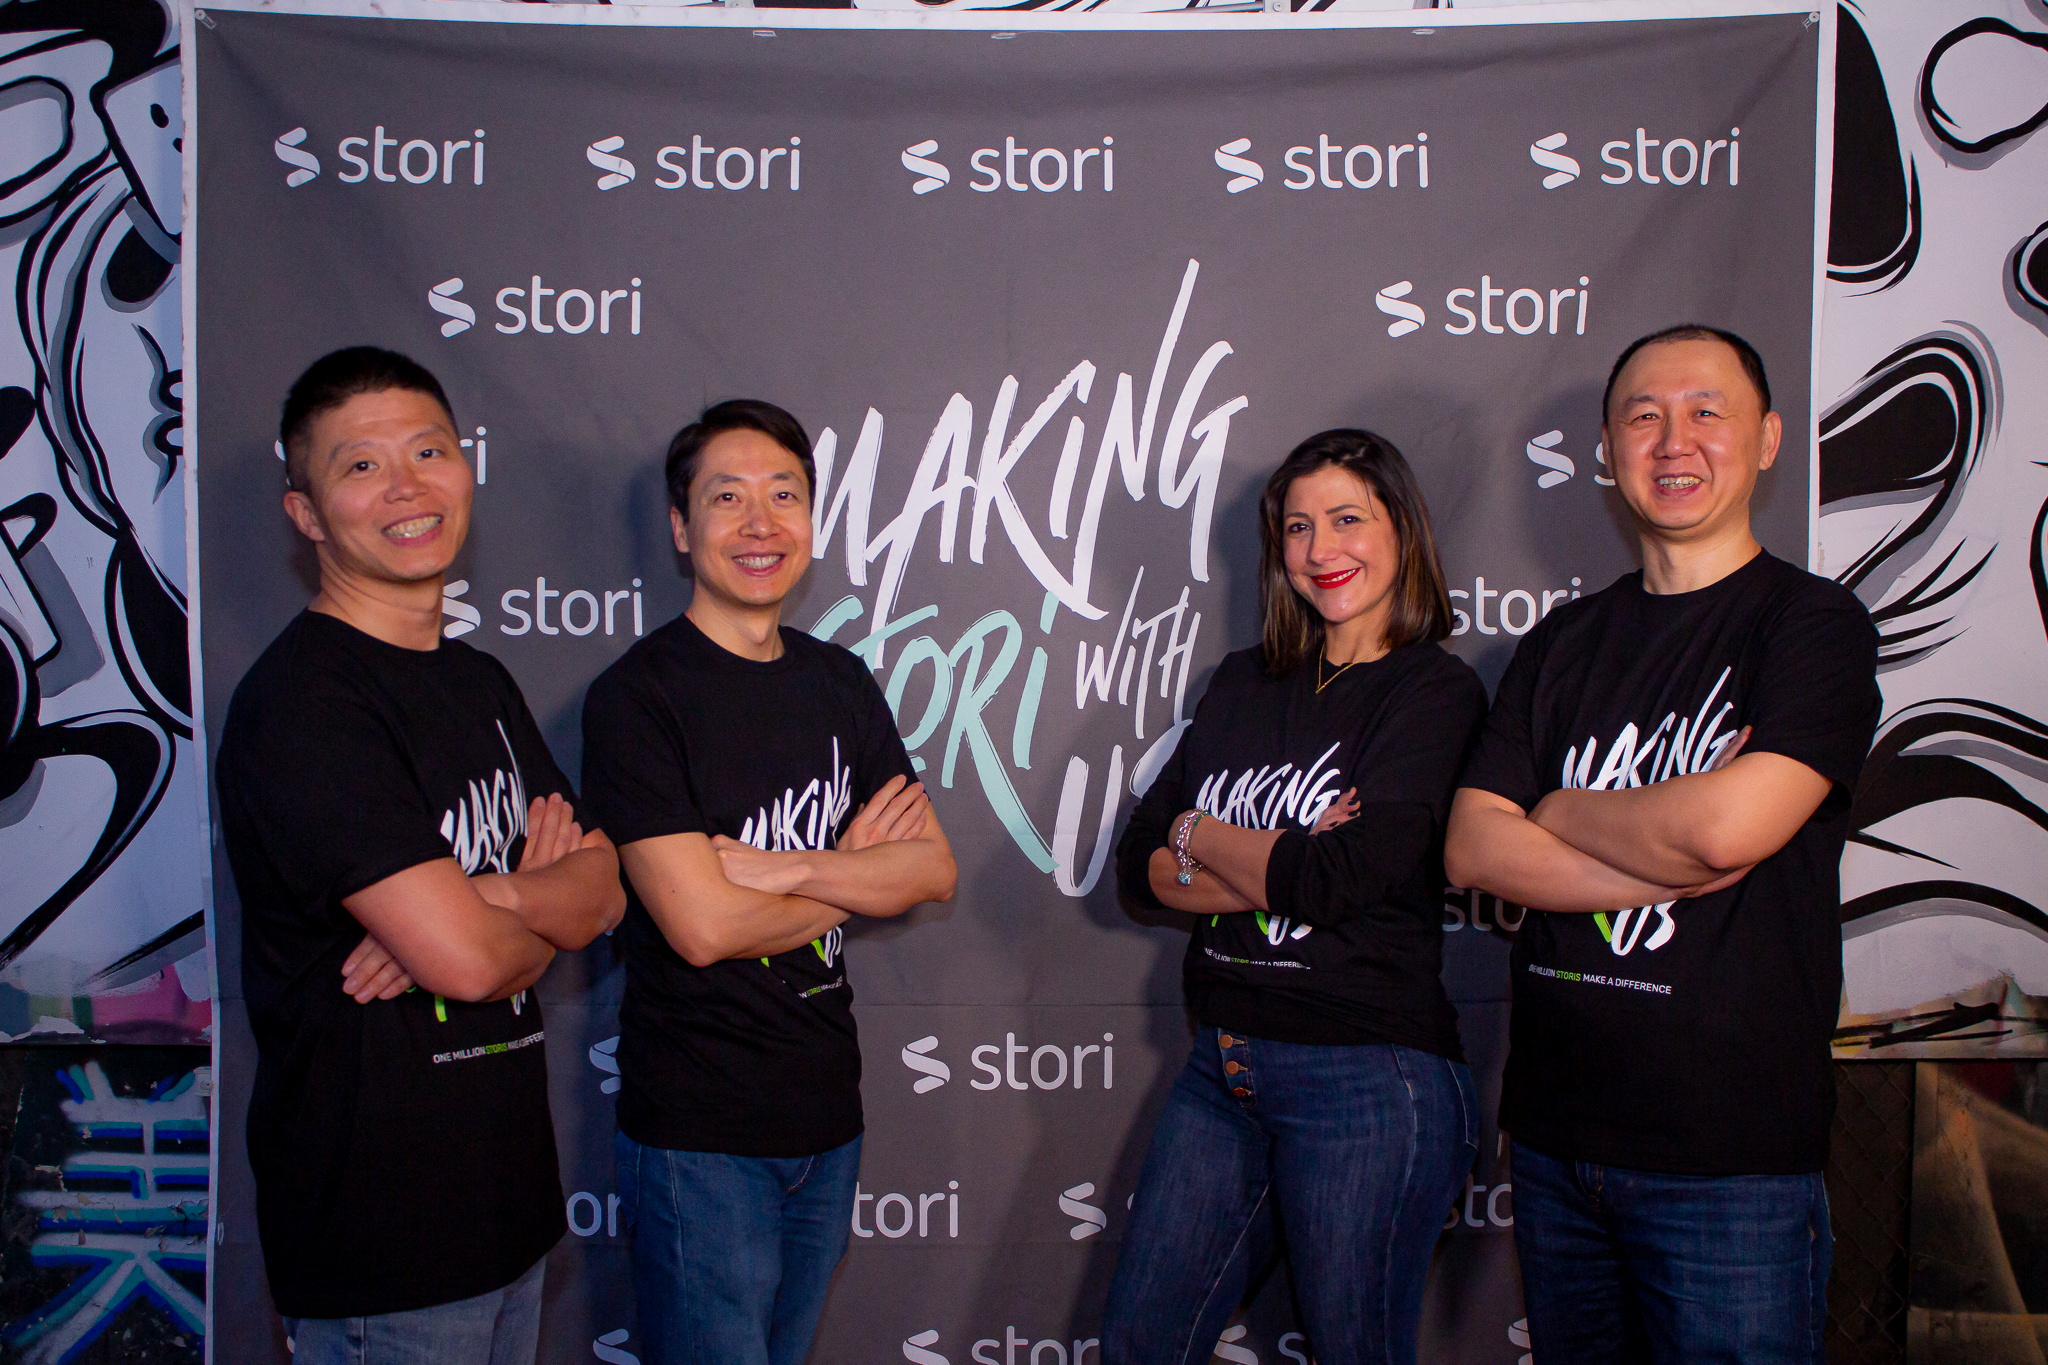 Stori's Sherman He, Bin Chen, Marlene Garayzar and Gy Liu pose for a photo during an event to mark the 1 million clients of Stori, in Mexico City